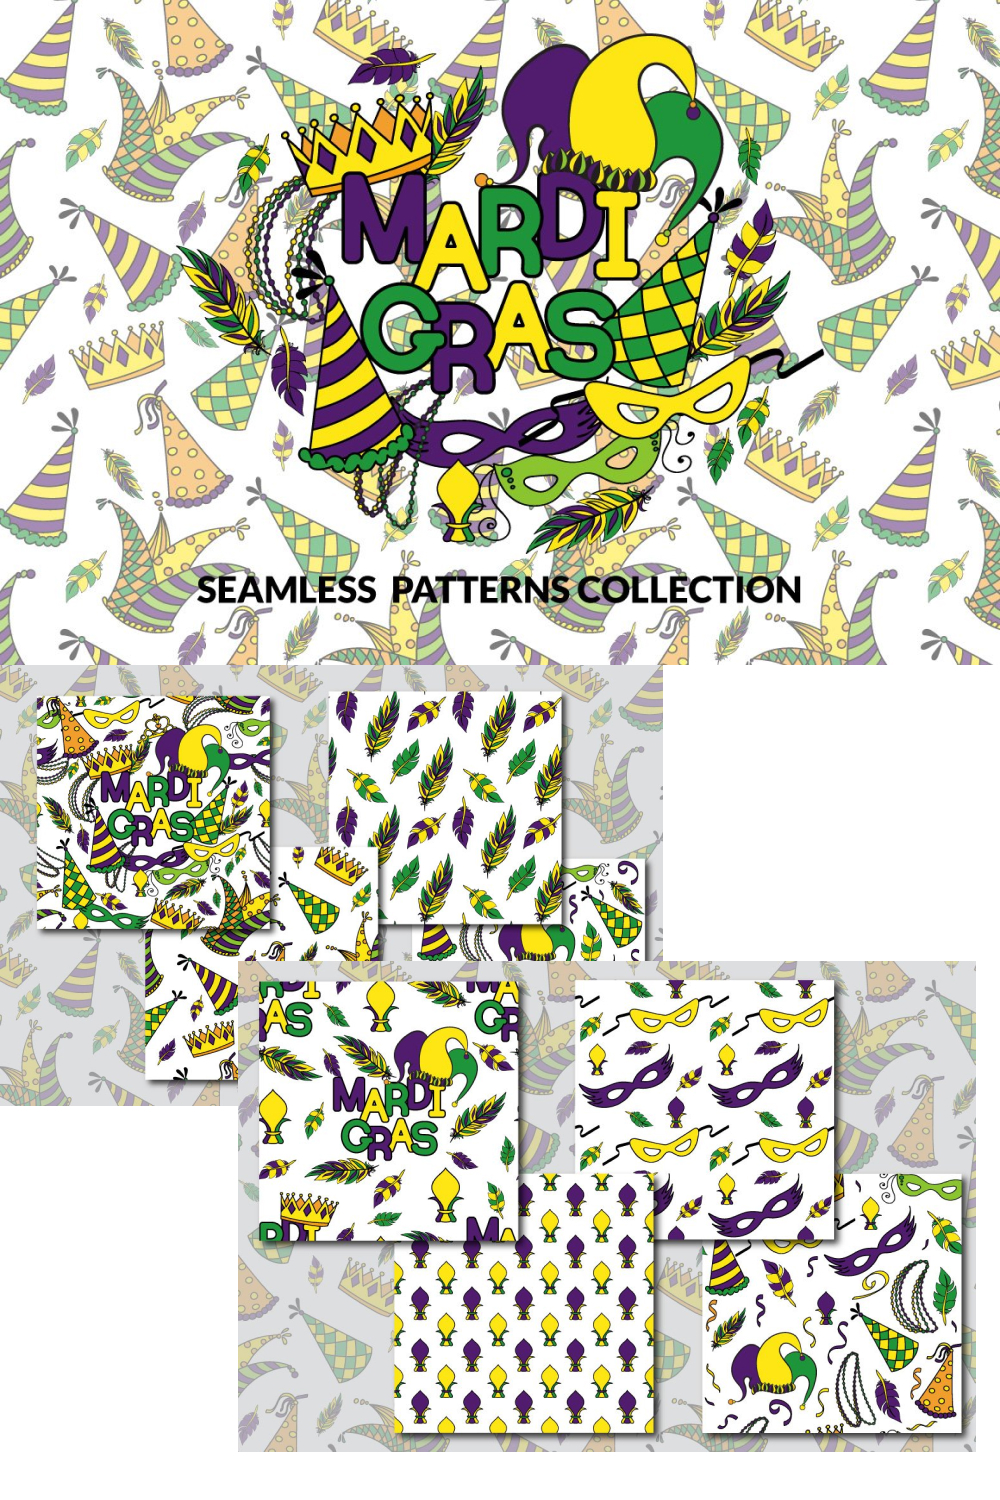 Pinterest images with mardi gras patterns collection.